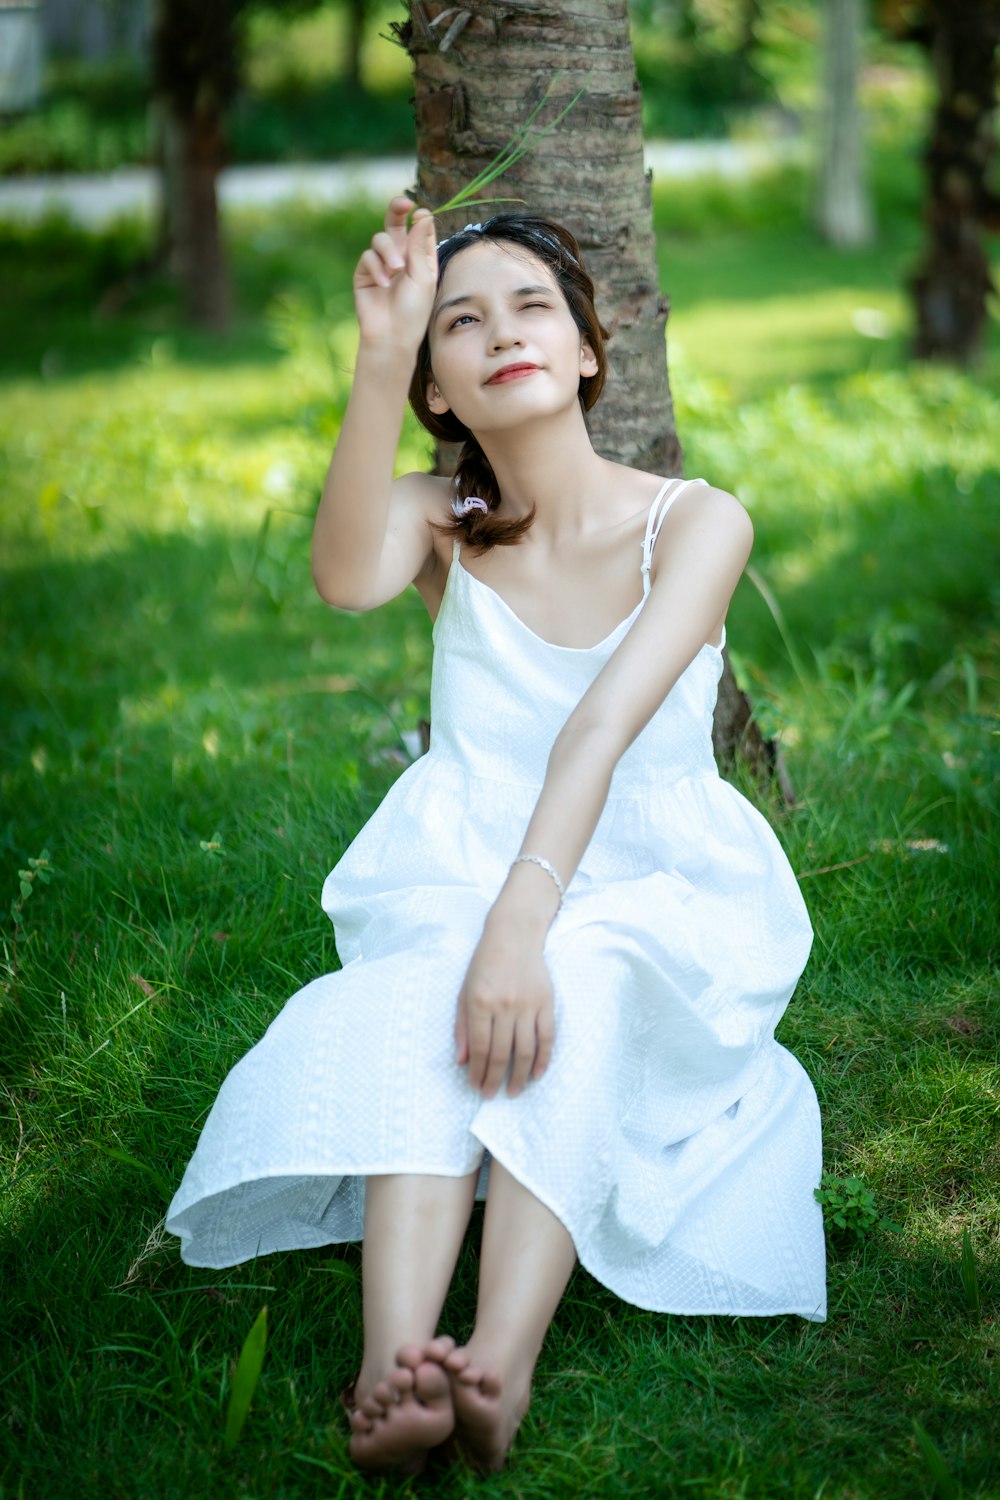 woman in white sleeveless dress sitting on green grass field during daytime